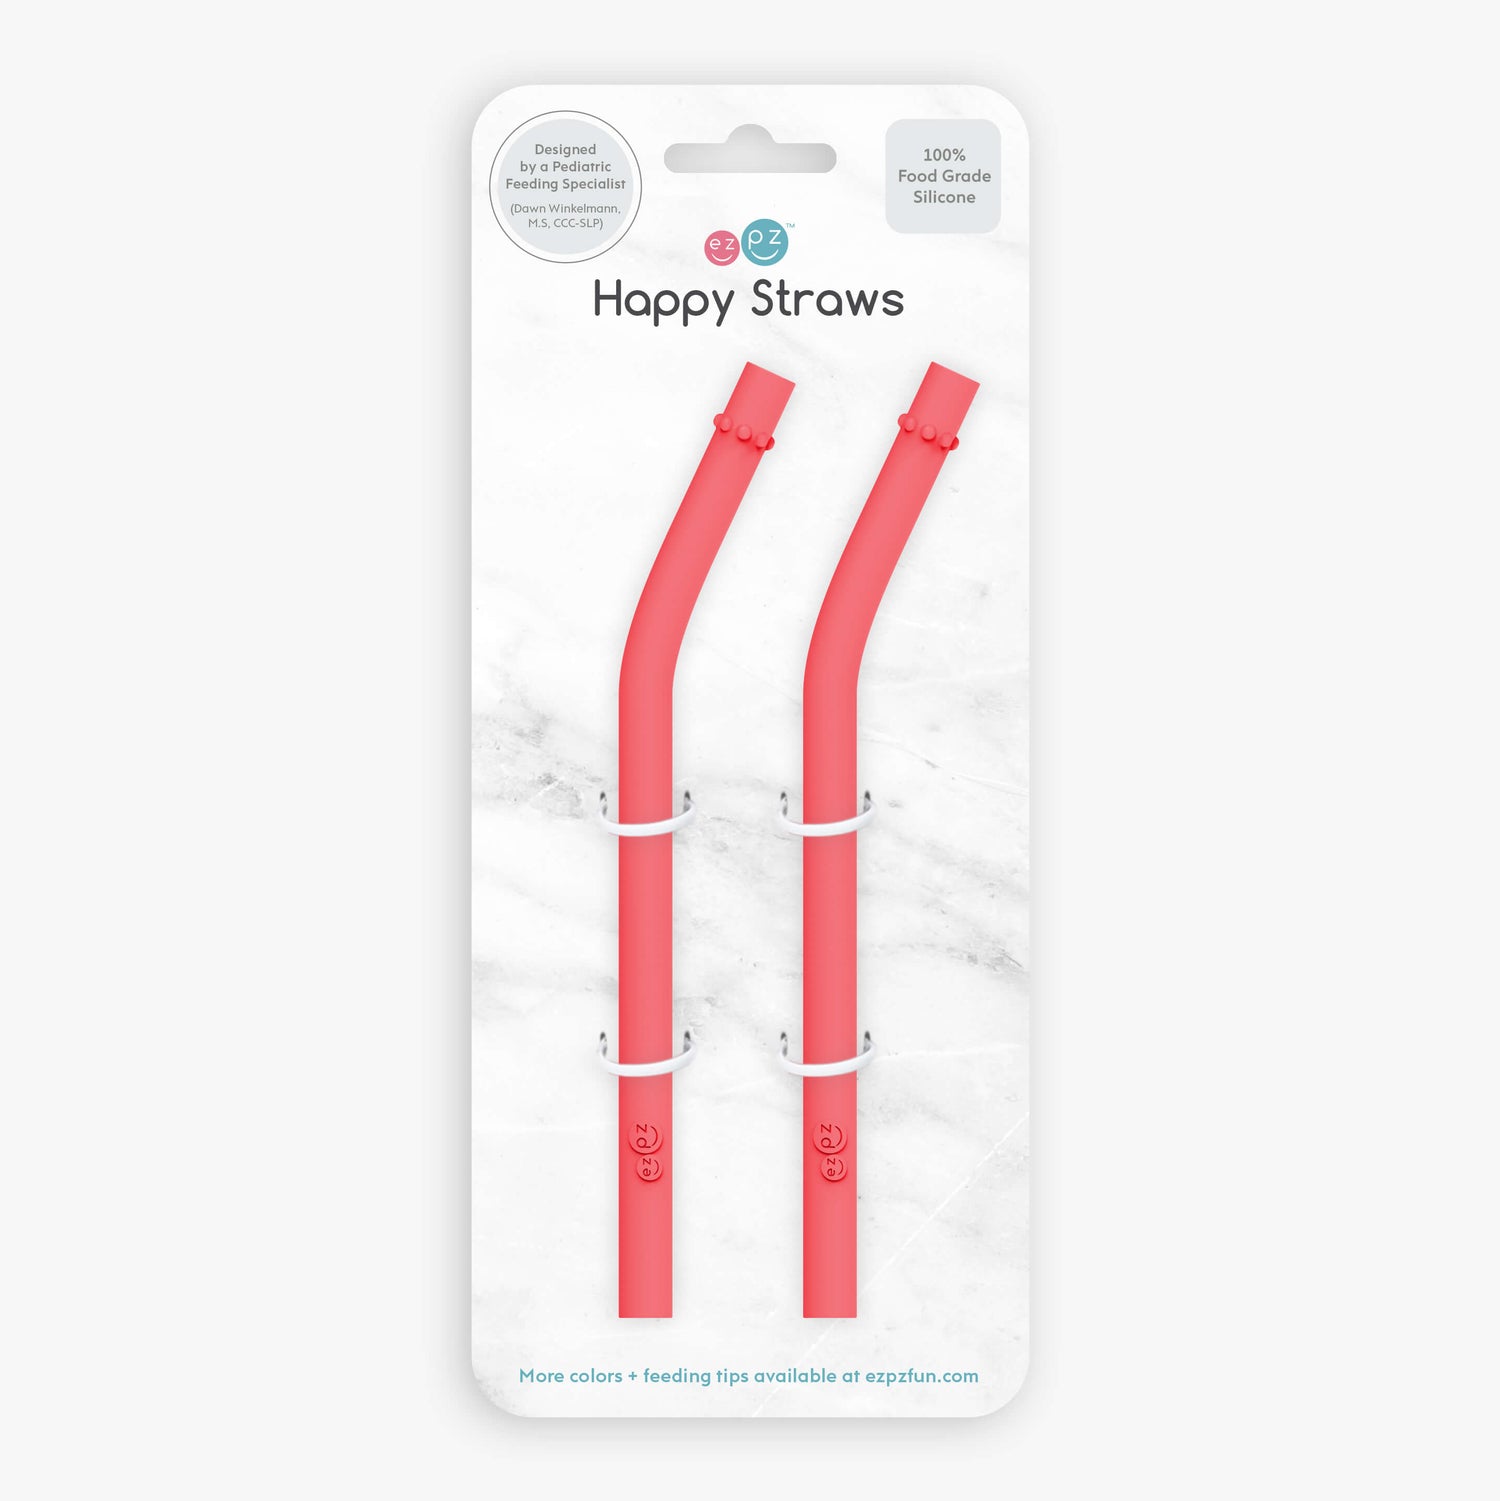 Happy Straws in Coral / Silicone Straw Replacement Pack for the ezpz Happy Cup & Straw System